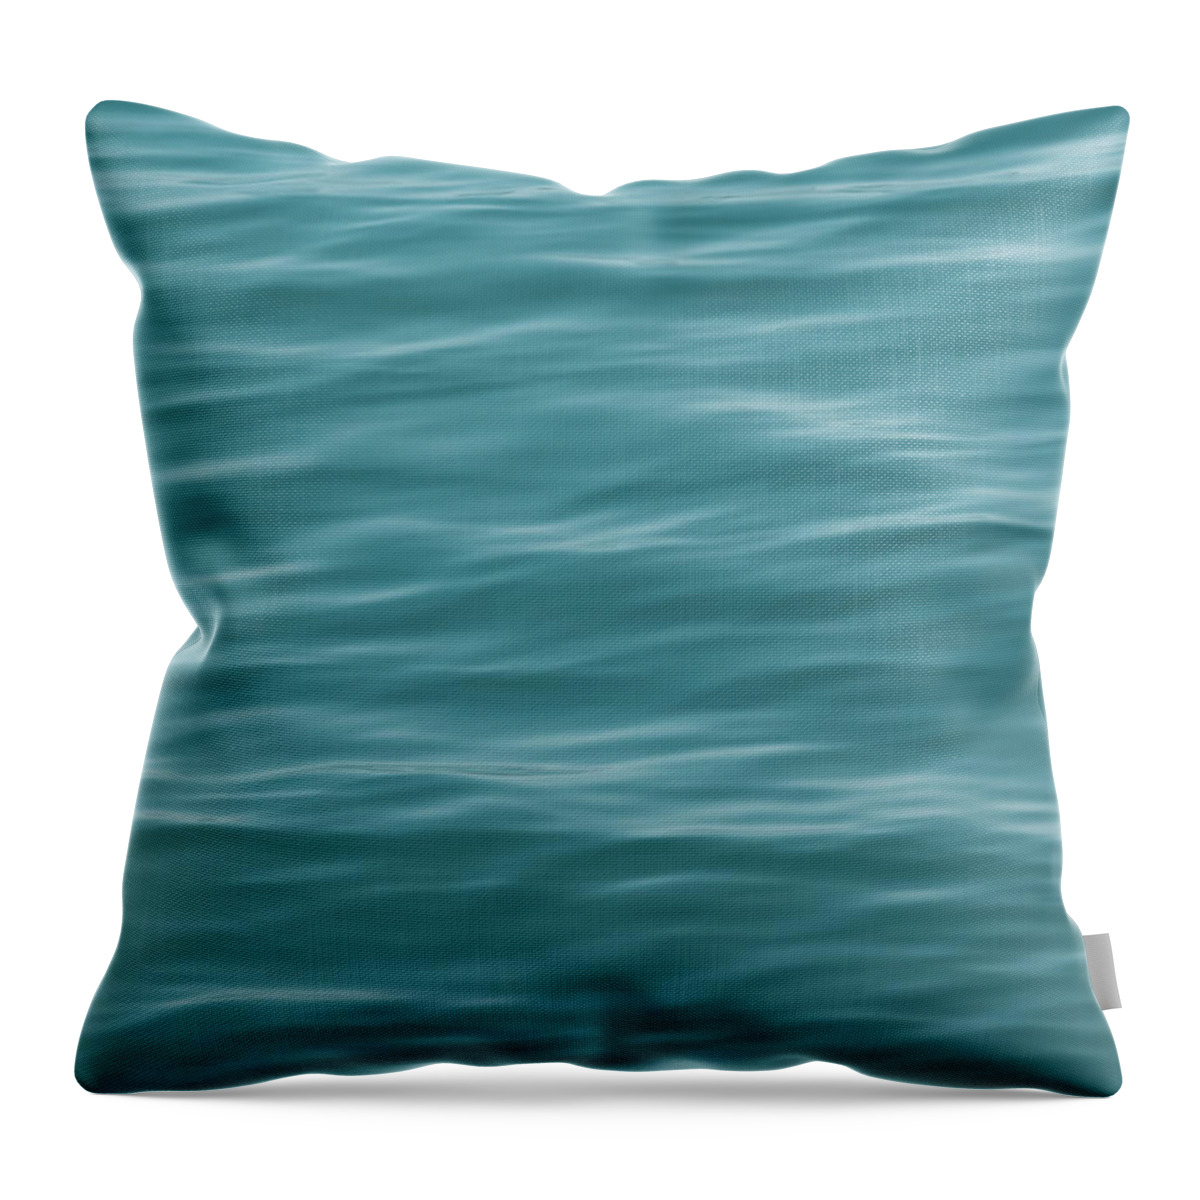 Tranquility Throw Pillow featuring the photograph Abstract Patterns In Nature - Water by Yuko Yamada